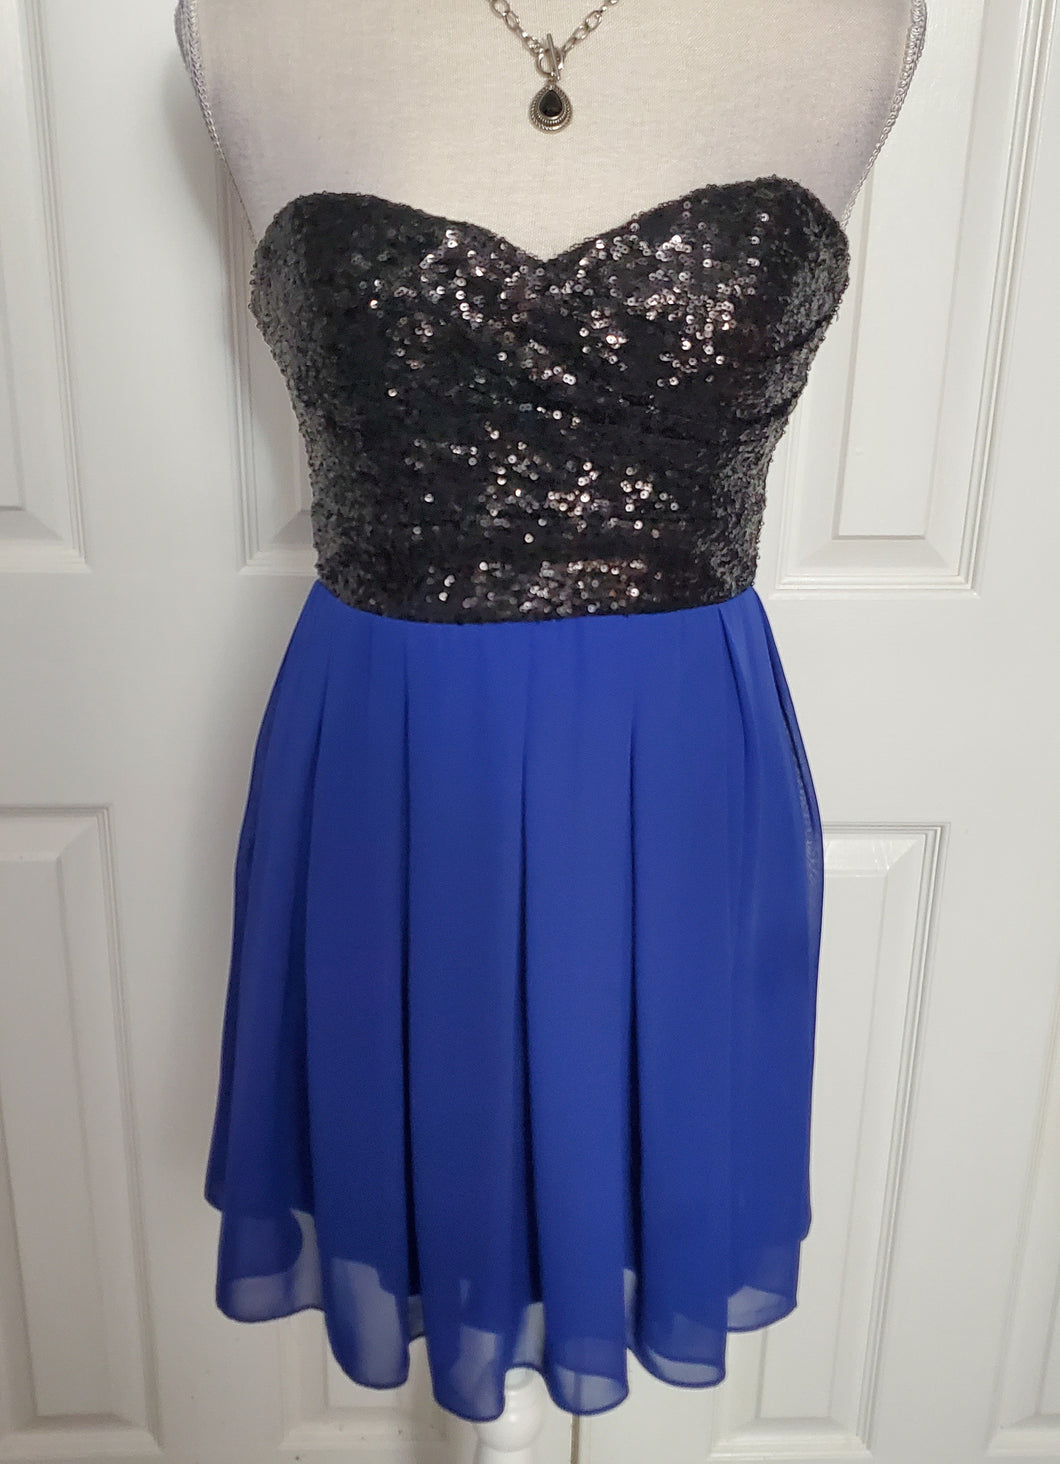 Soft Sequin Sweetheart Bodice Dress Size 5/6